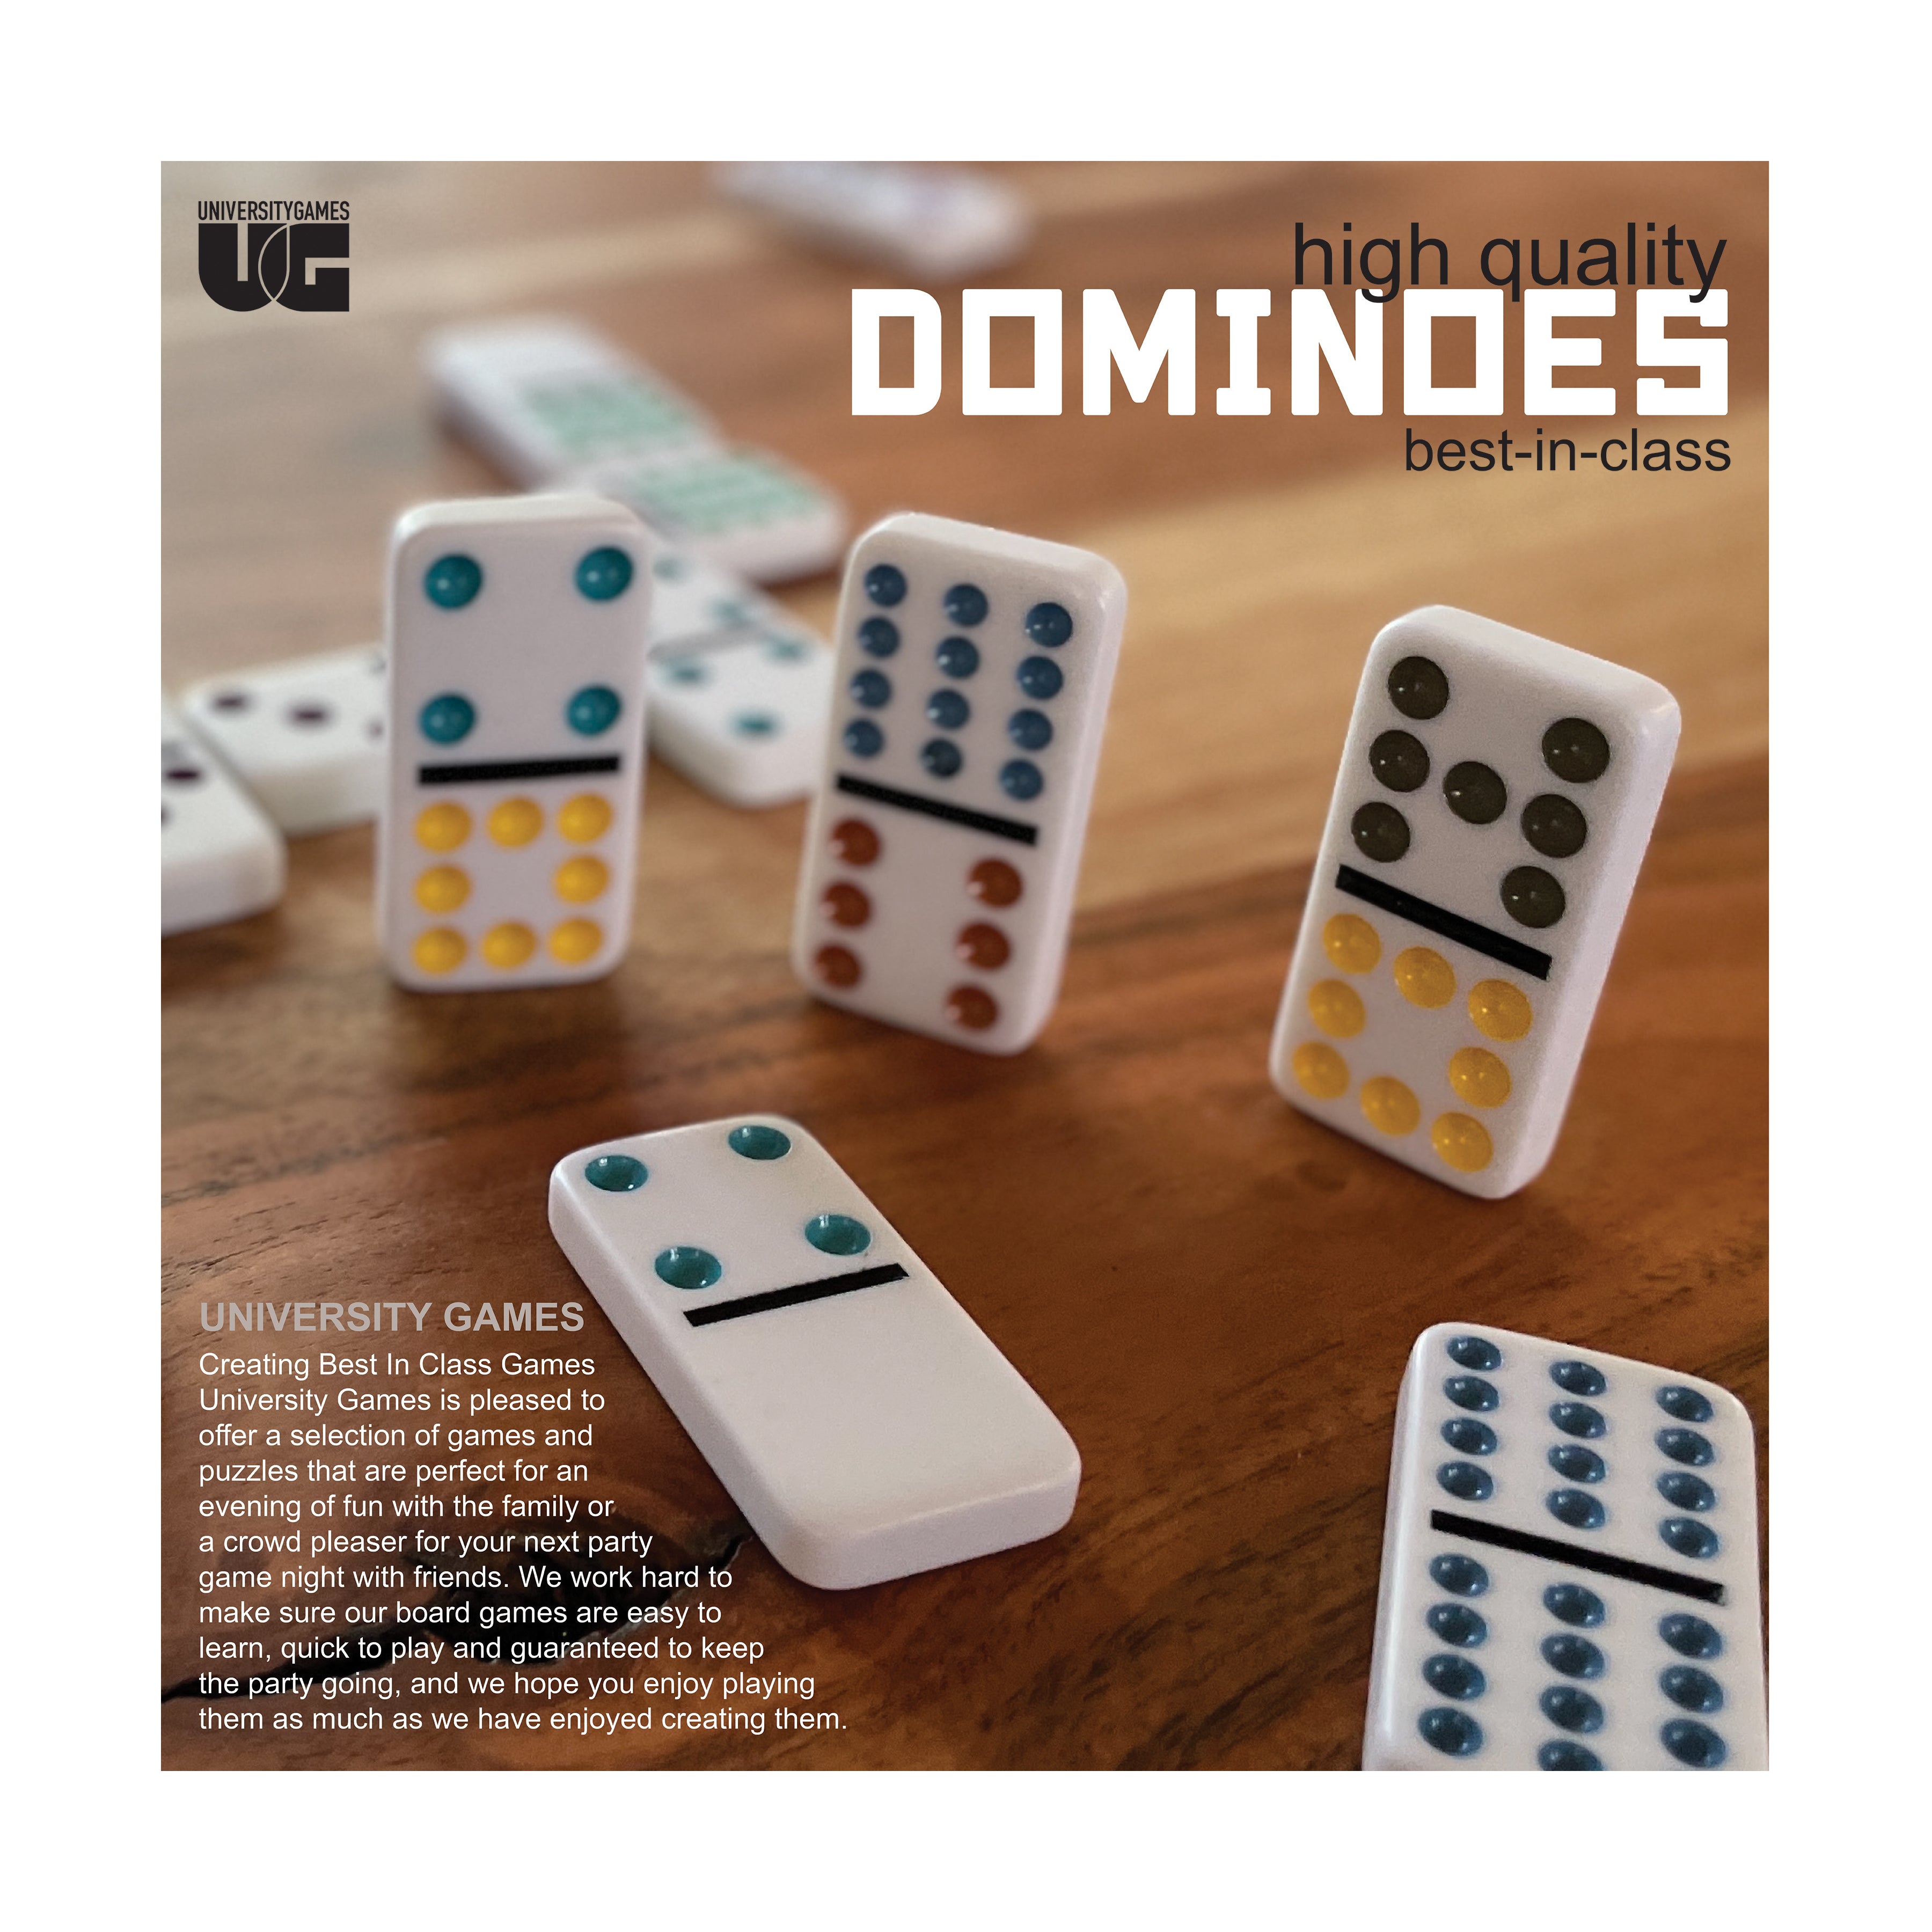 Domino - Dominos online game - Apps on Google Play